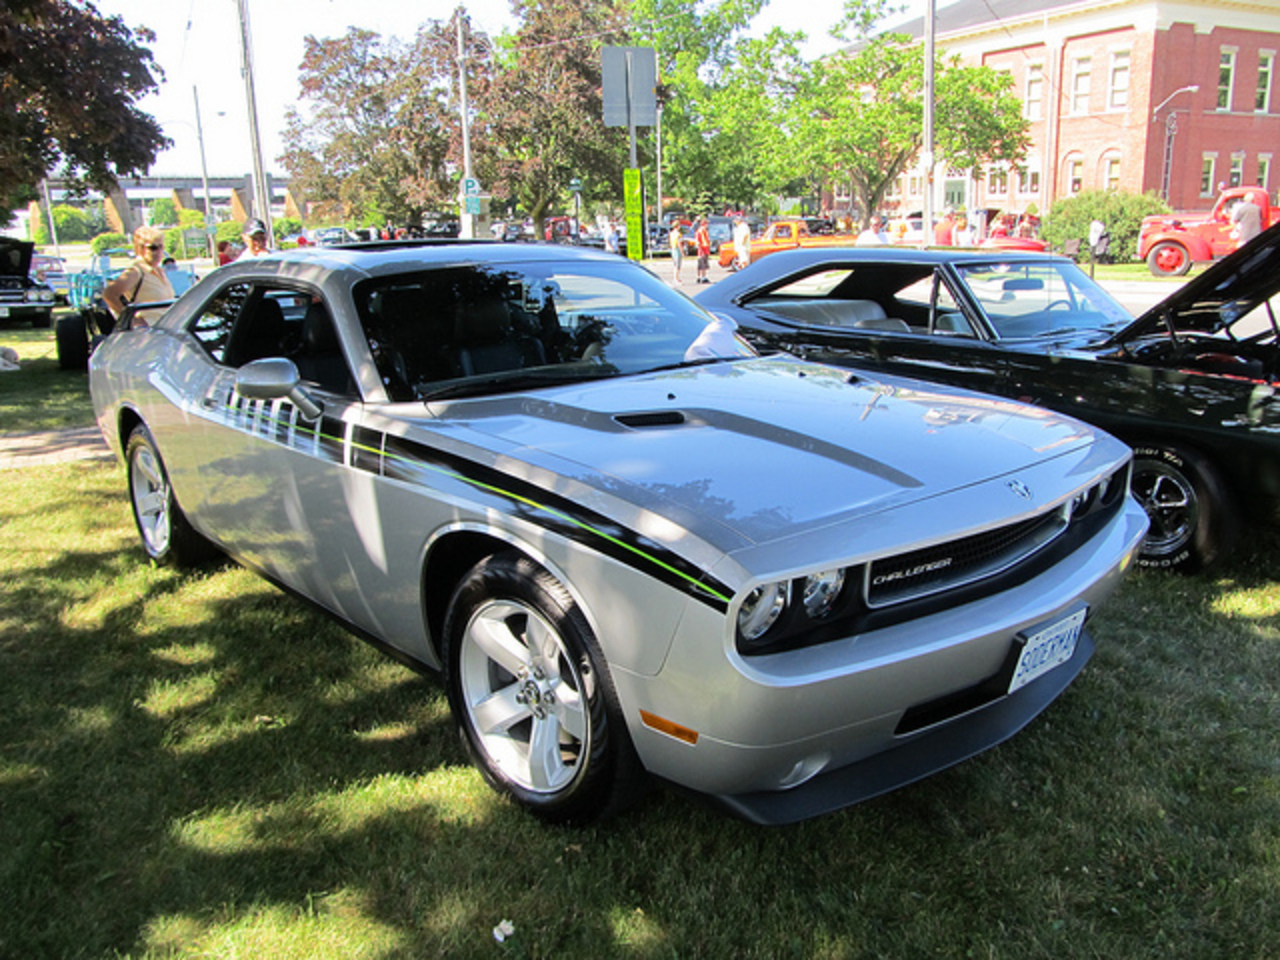 D Dodge Challenger coupe. Dominion Day Car Show,Port Hope Ont ...